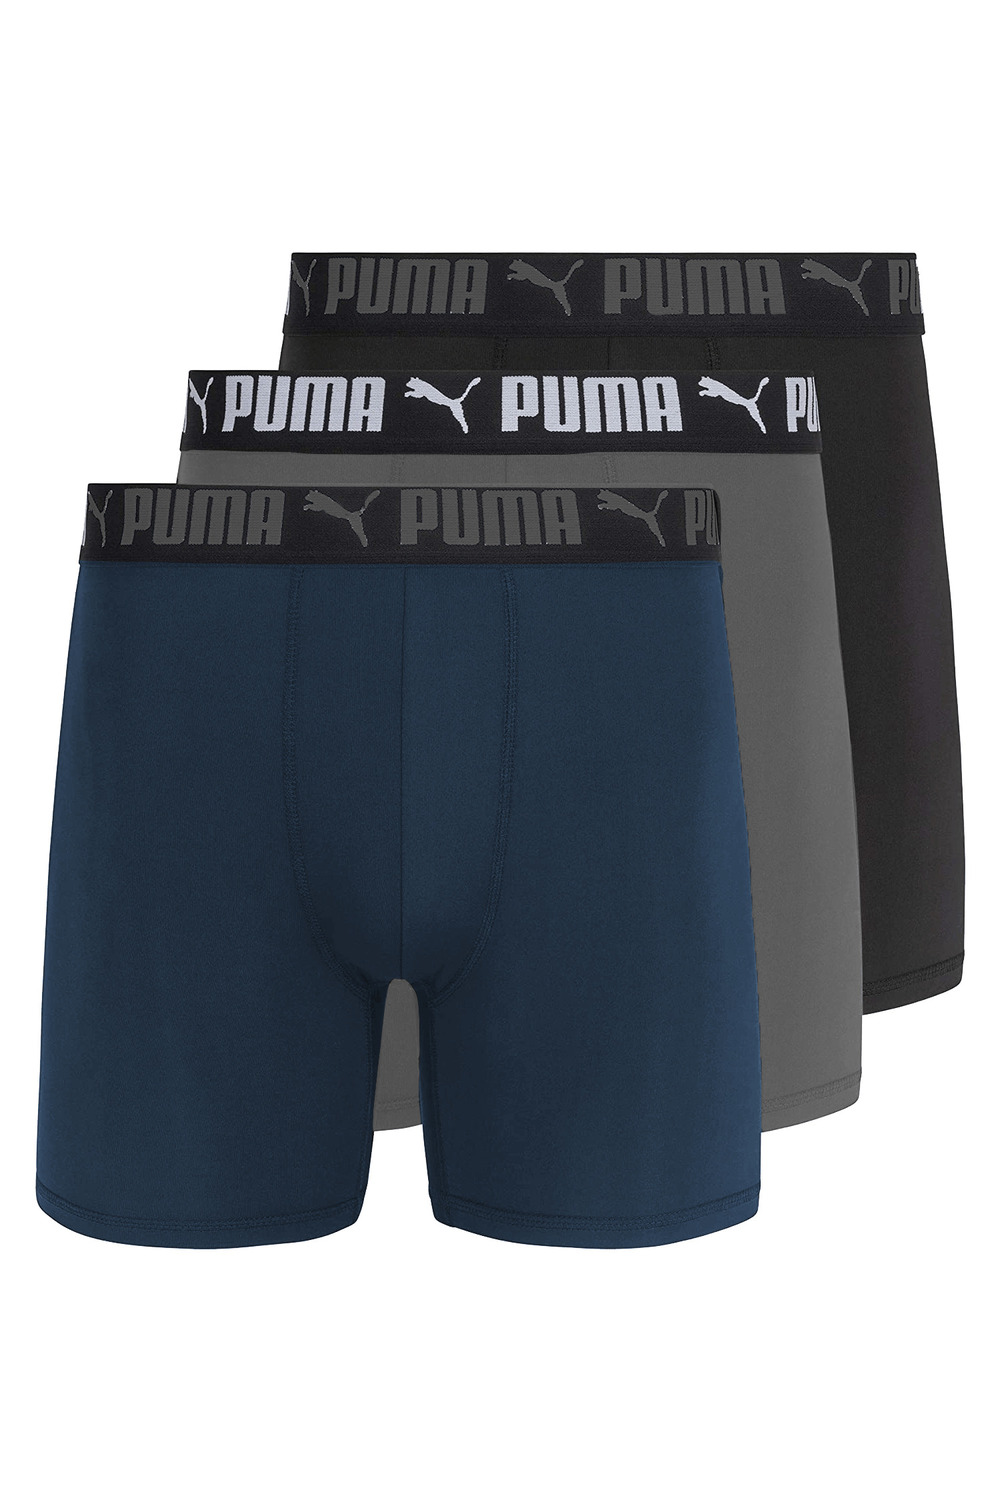 Buy Starter men 3 pk performance boxer briefs turquoise and blue and navy  Online